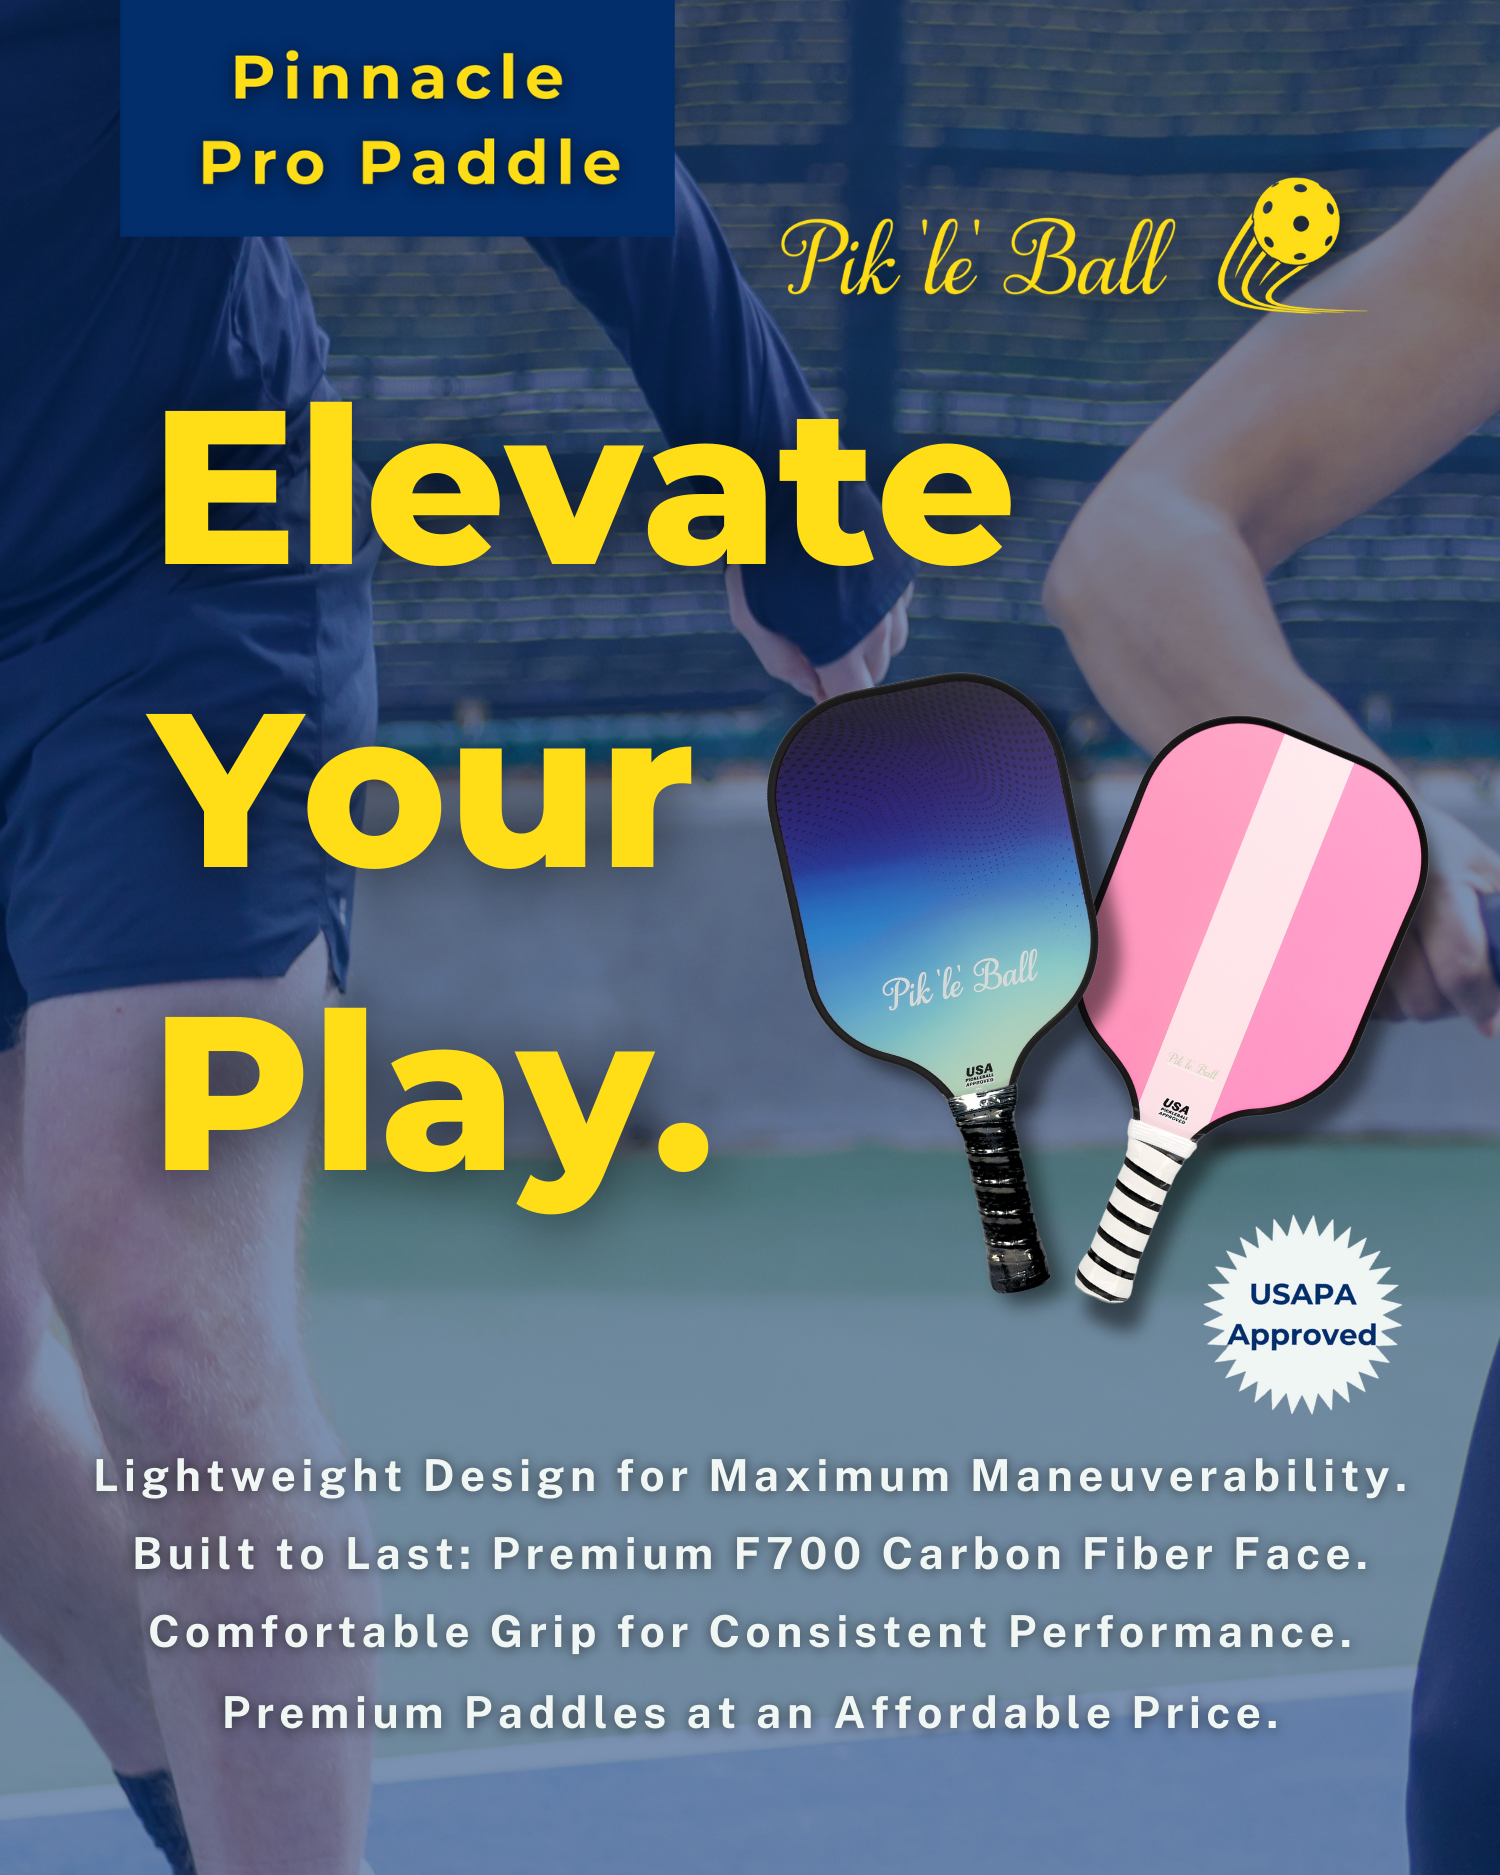 Lightweight pinnacle pro carbon fiber ladies pickleball paddles with comfortable grip improve your game play